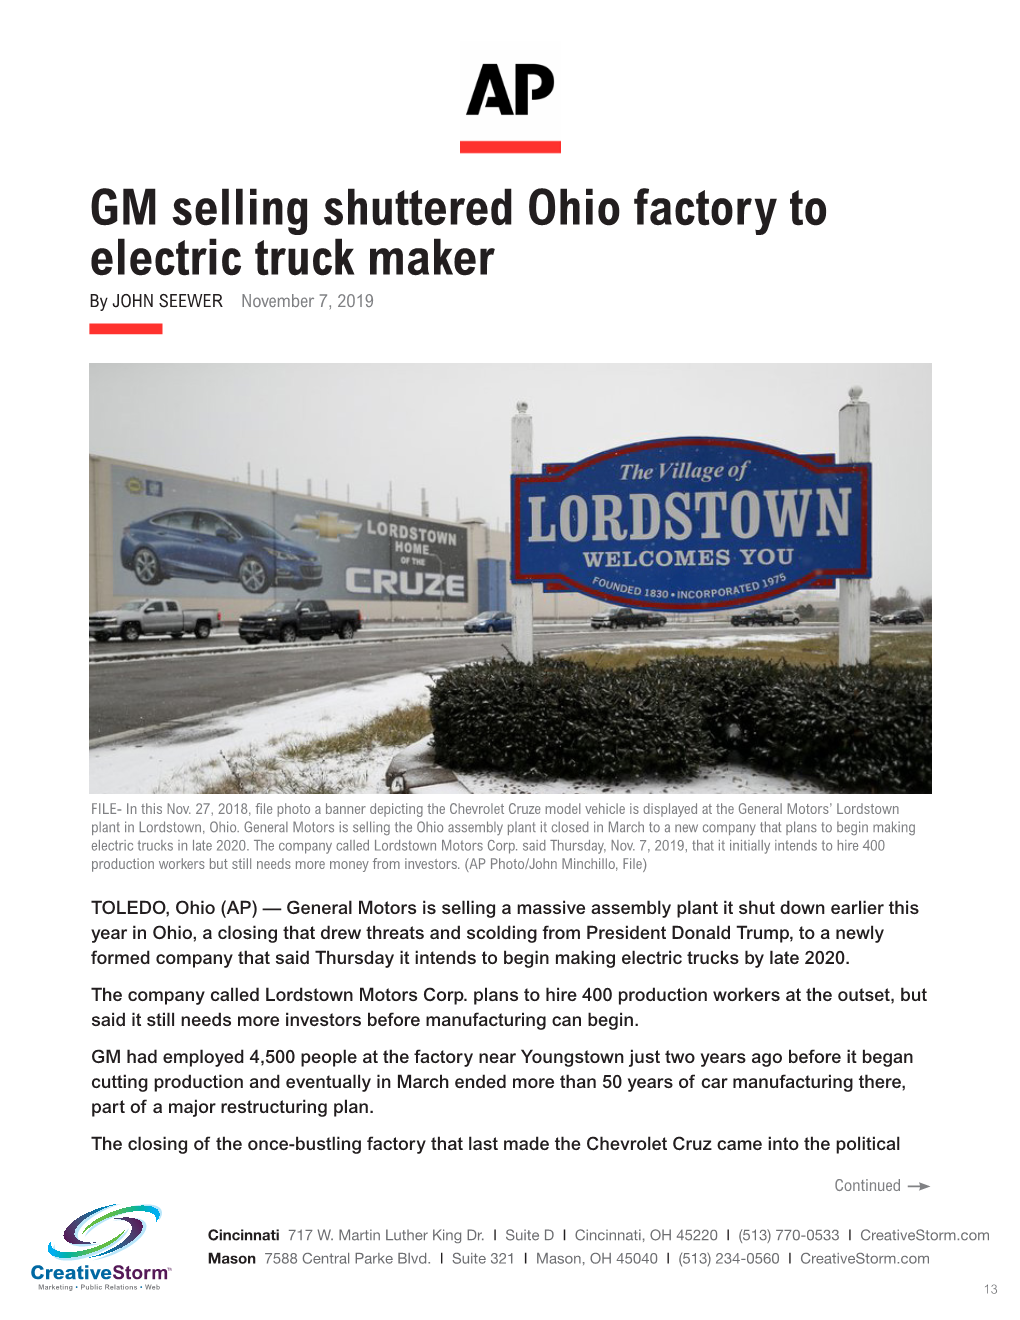 GM Selling Shuttered Ohio Factory to Electric Truck Maker by JOHN SEEWER November 7, 2019